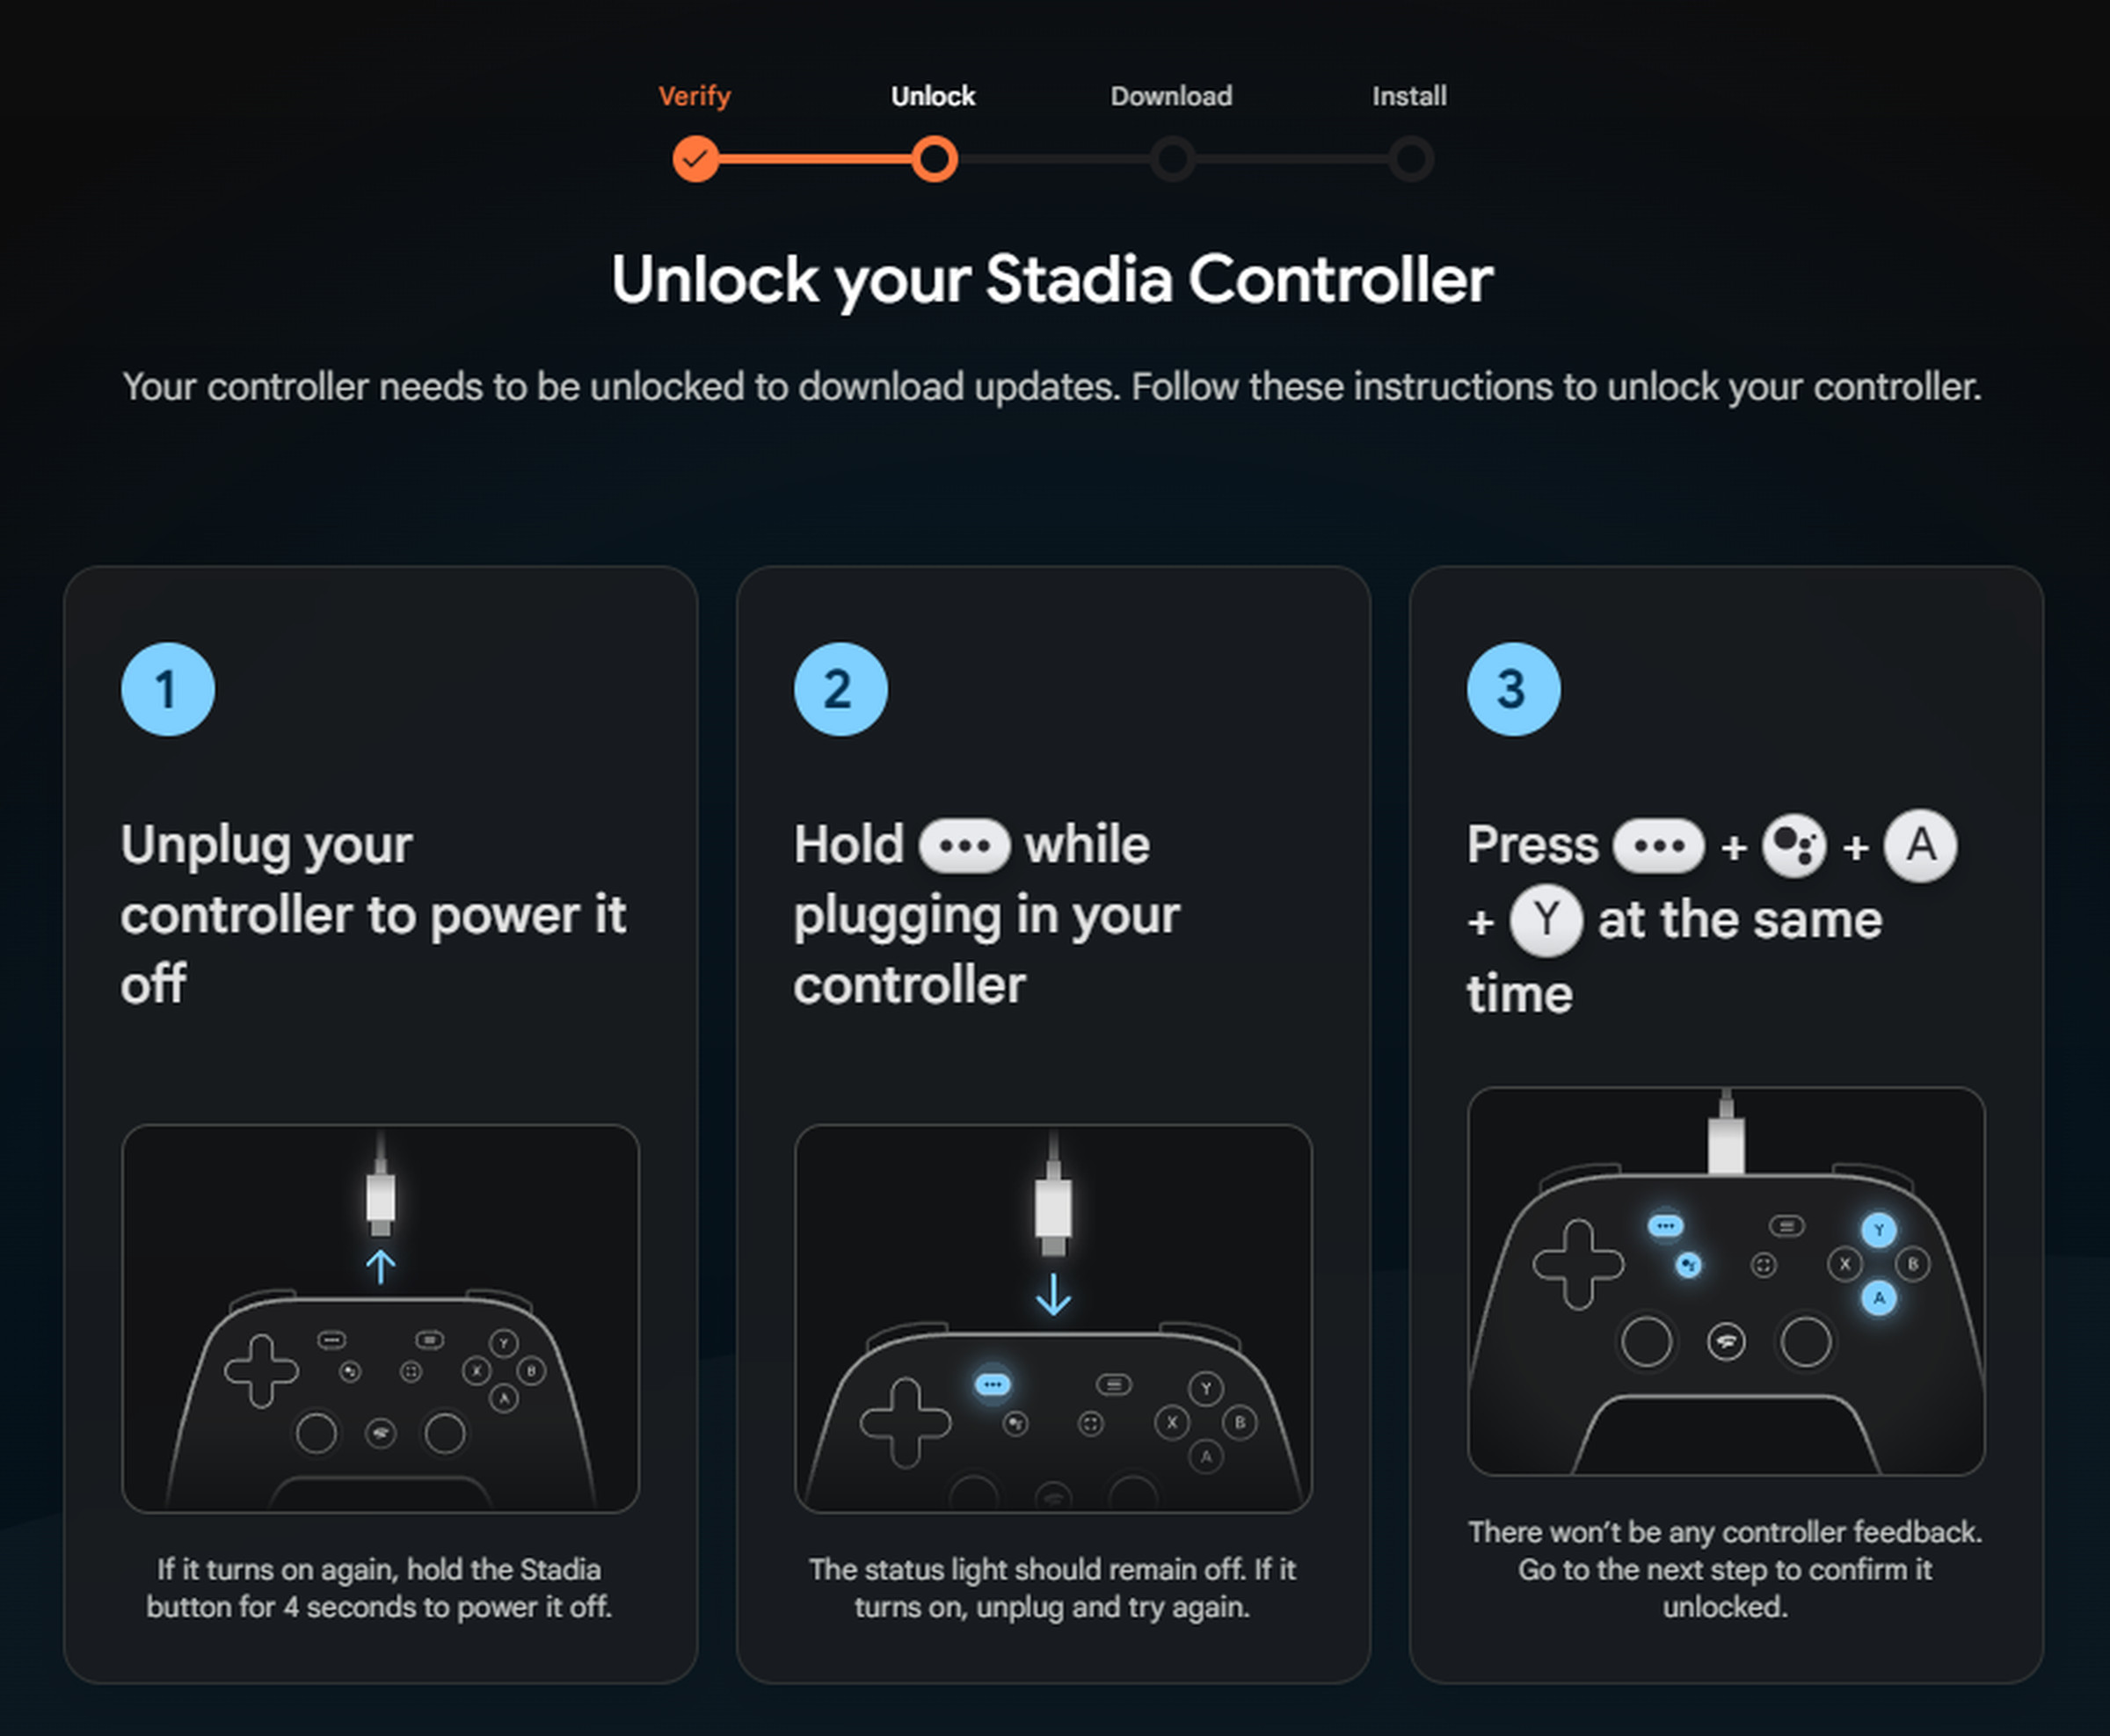 Screenshot showing how to enable Bluetooth mode on the Google Stadia controller